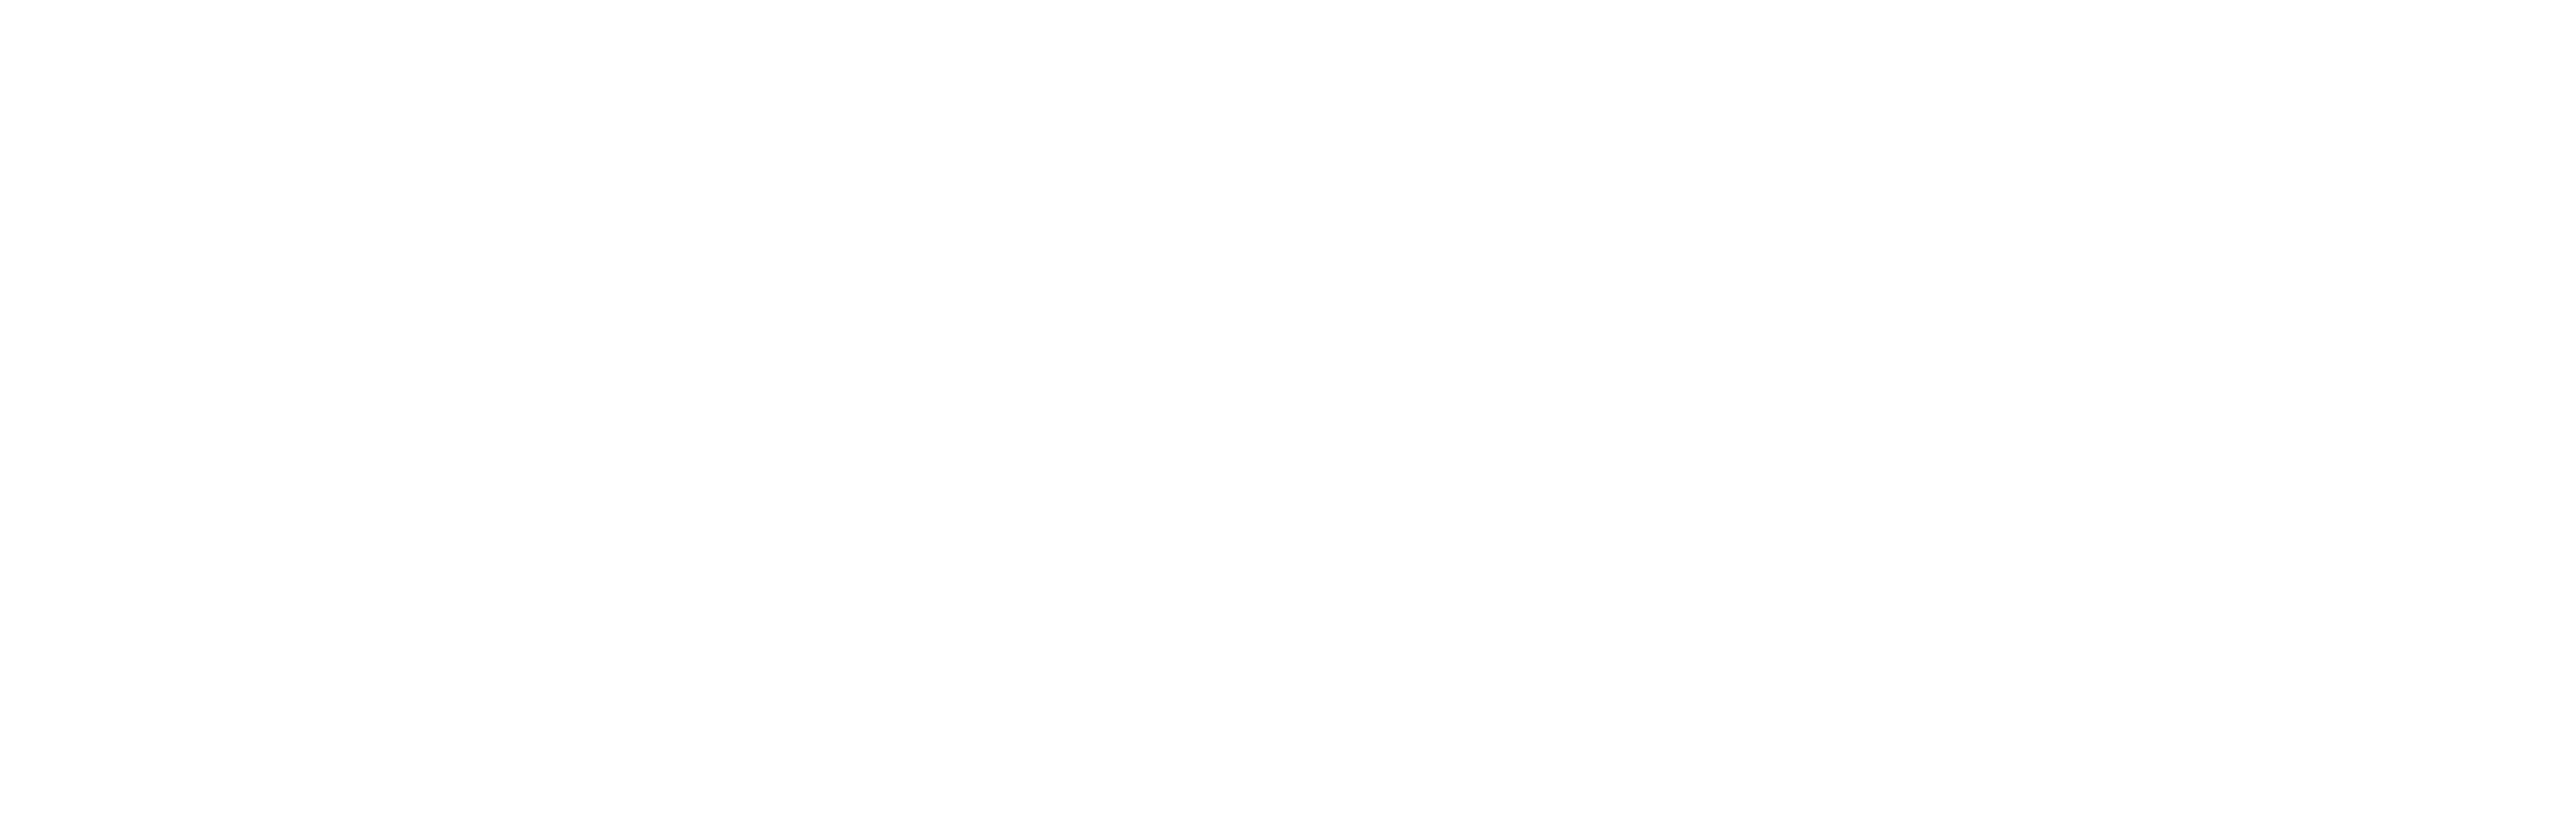 The premiere global AI for Good summit hosted annually in Geneva